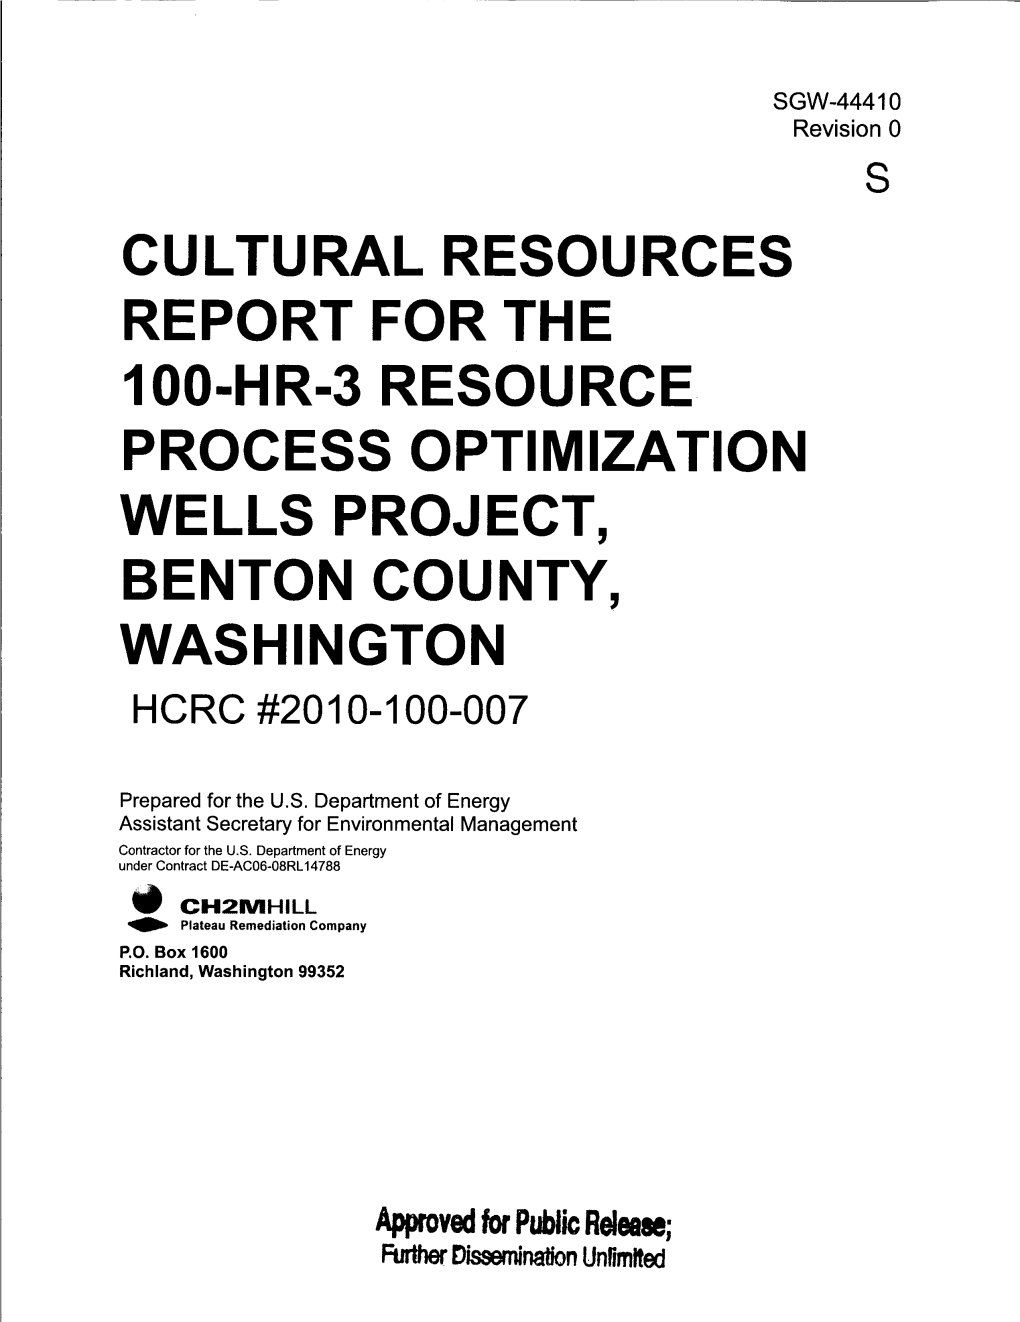 Cultural Resources Report for the 100-Hr-3 Resource Process Optimization Wells Project, Benton County, Washington Hcrc #2010-100-007